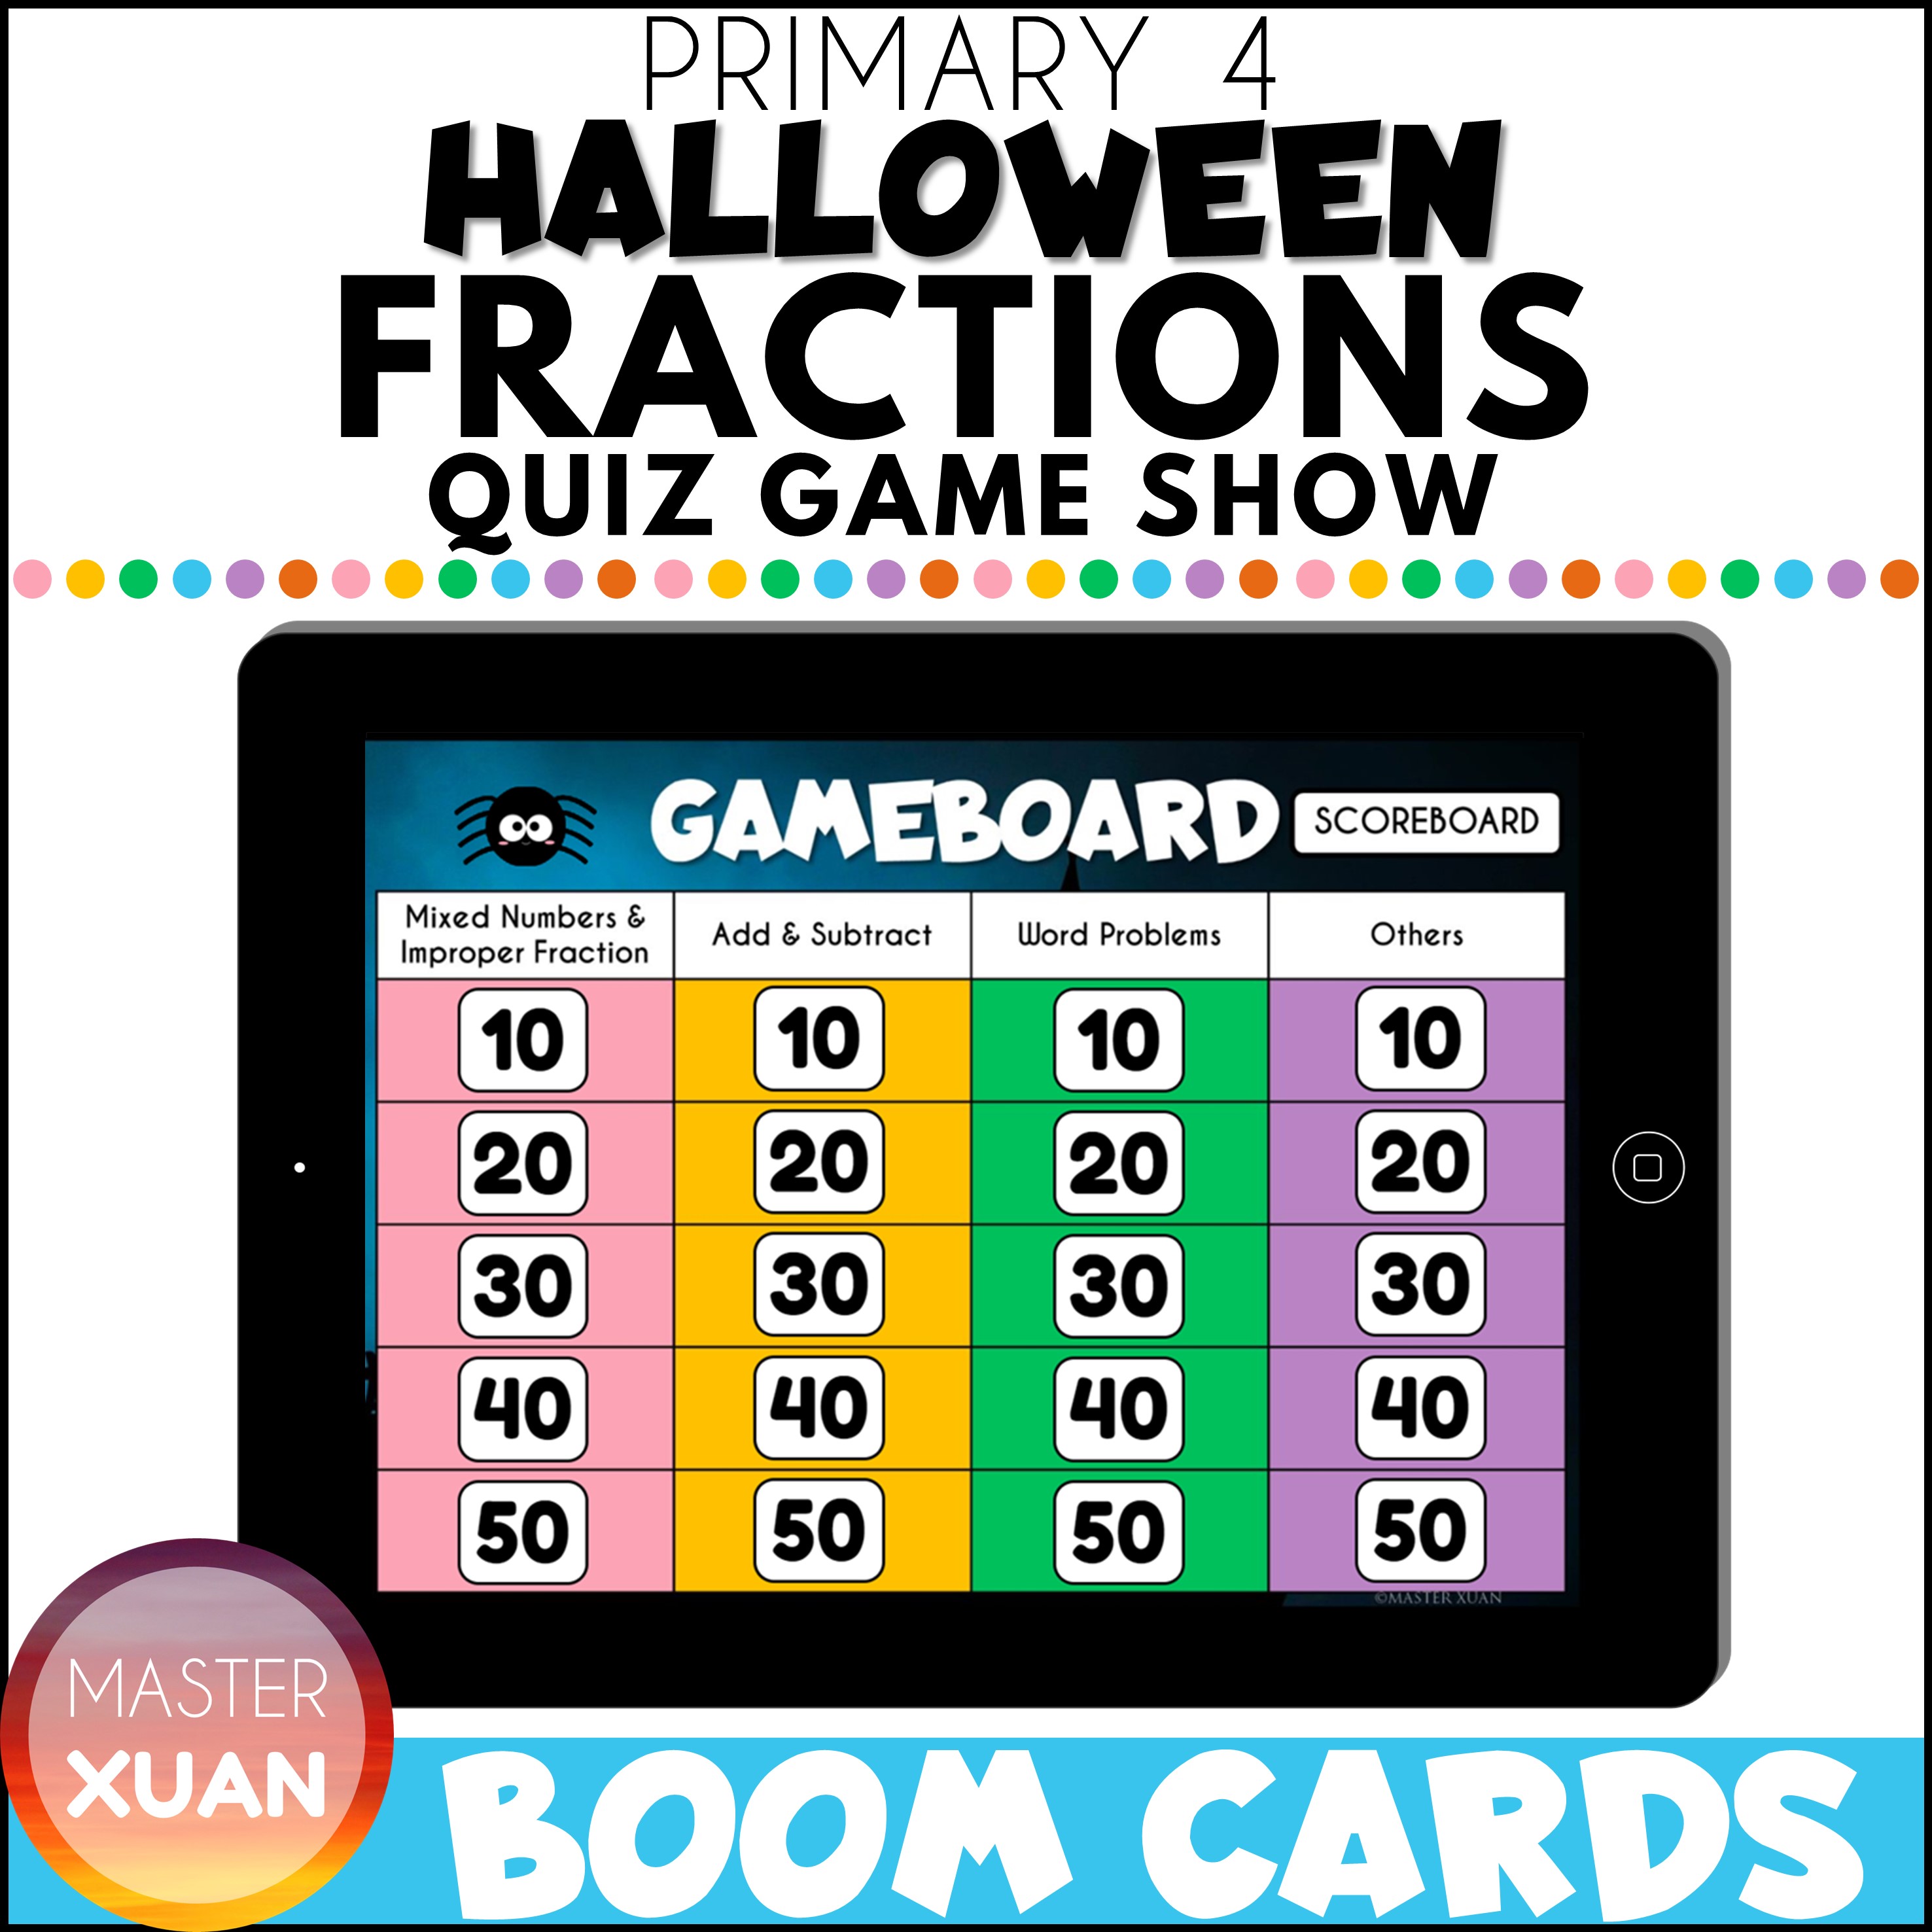 Halloween Fraction Games Quiz Game Show is fun and engaging!